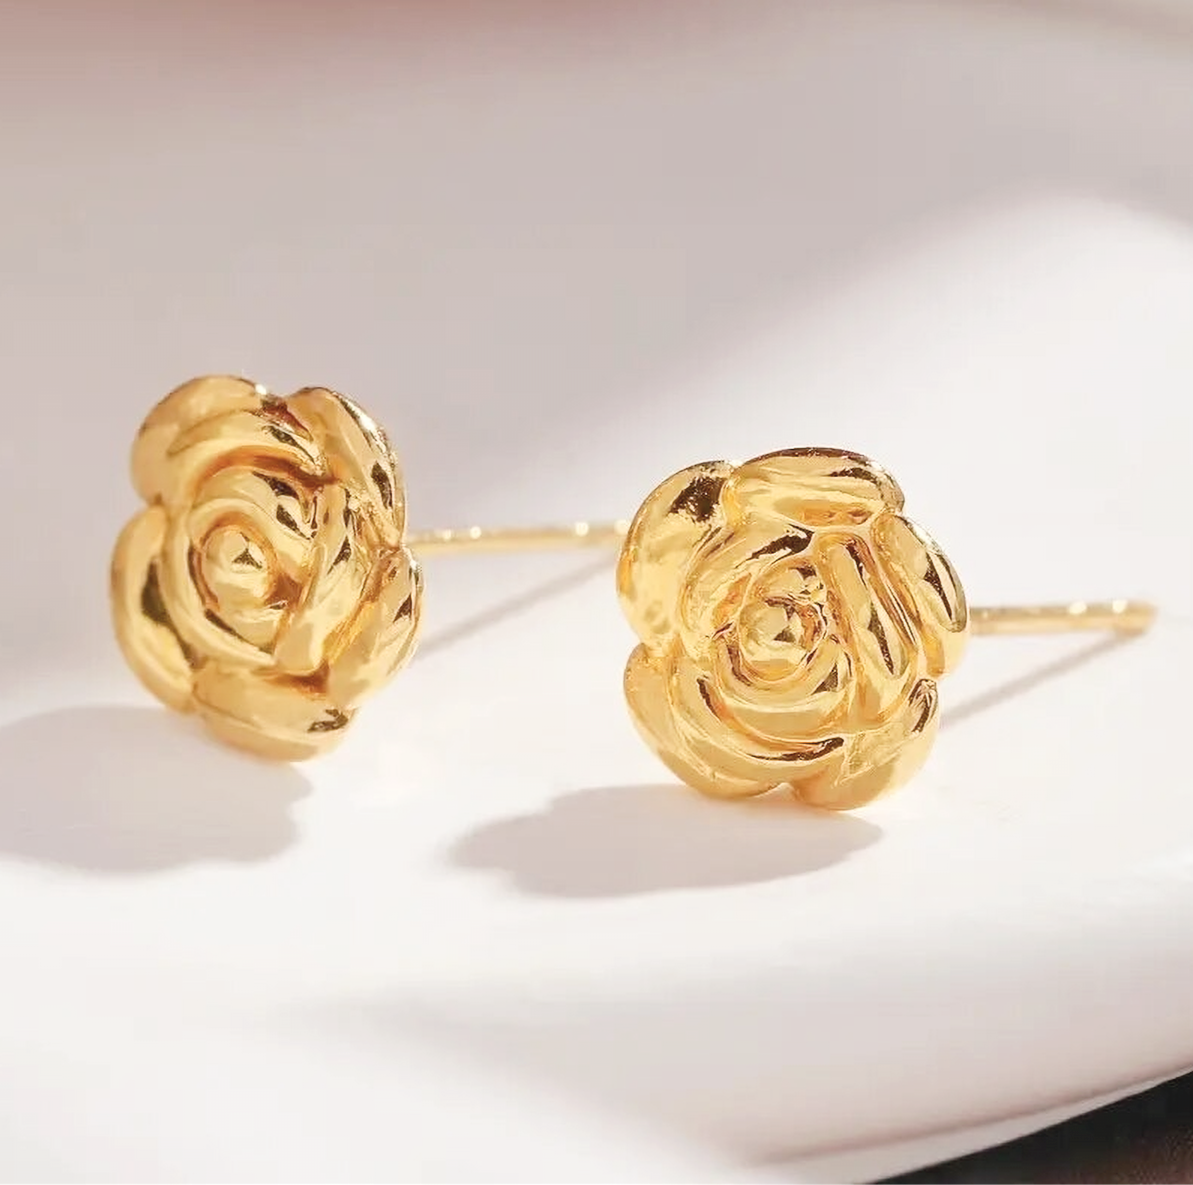 Victoria Rose Stud Solid 18ct Gold Earrings